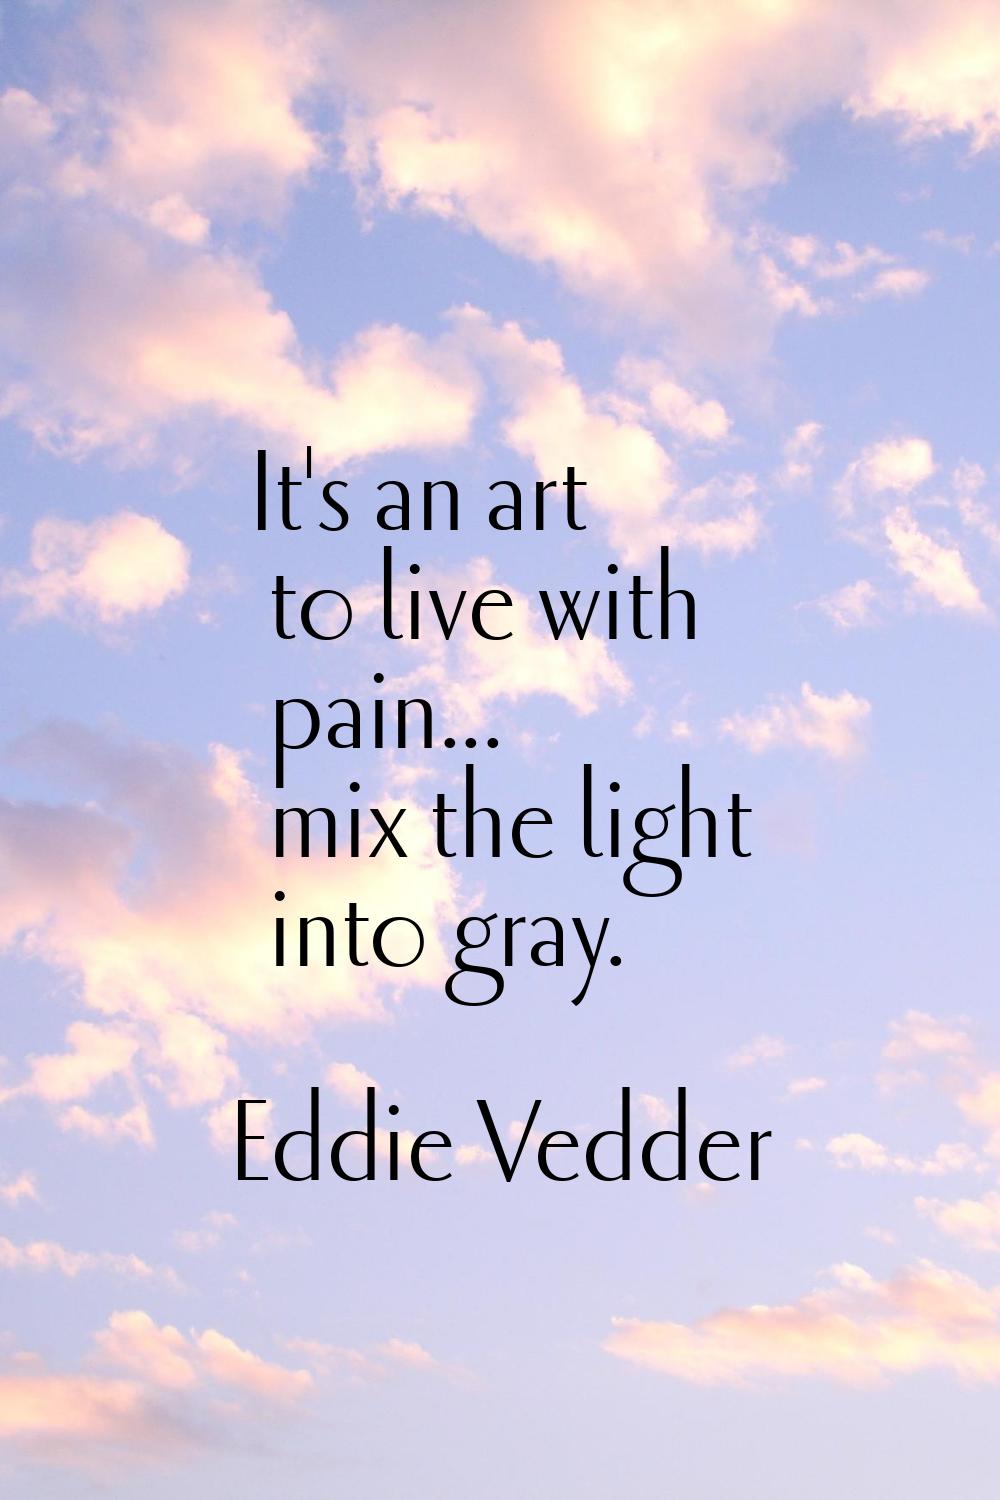 It's an art to live with pain... mix the light into gray.